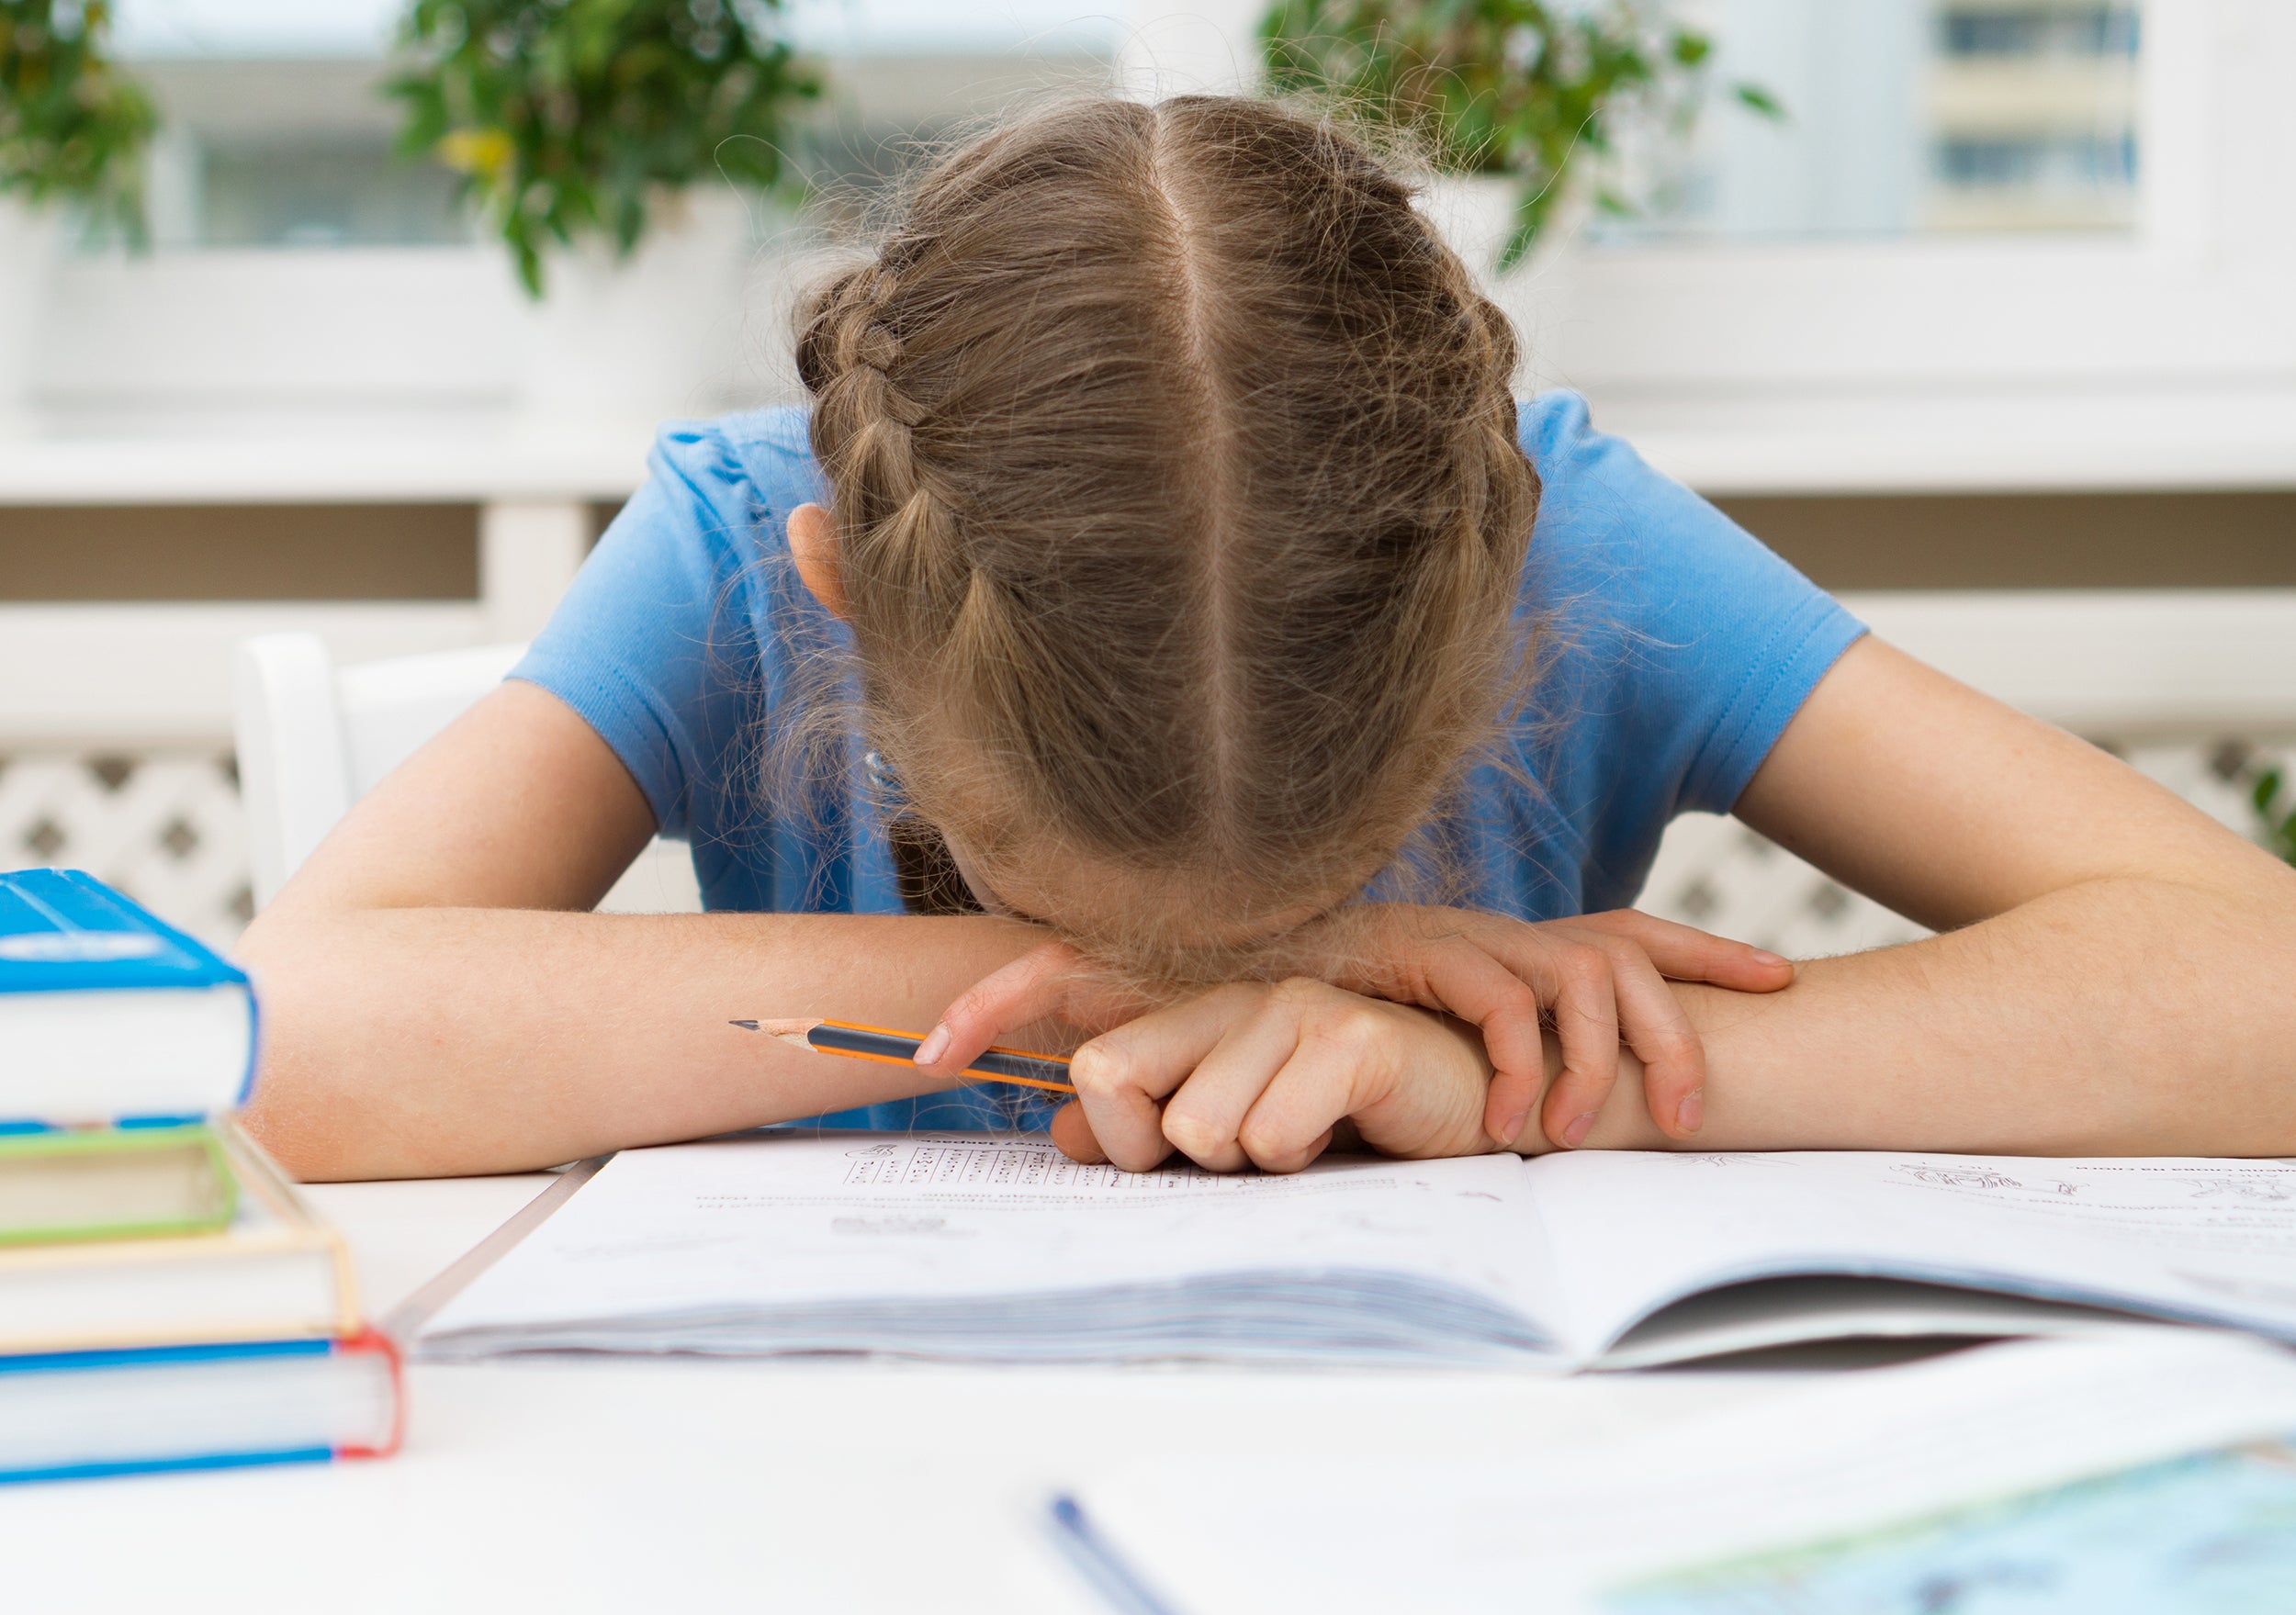 5 Signs of Stress in Children - having difficulty in school